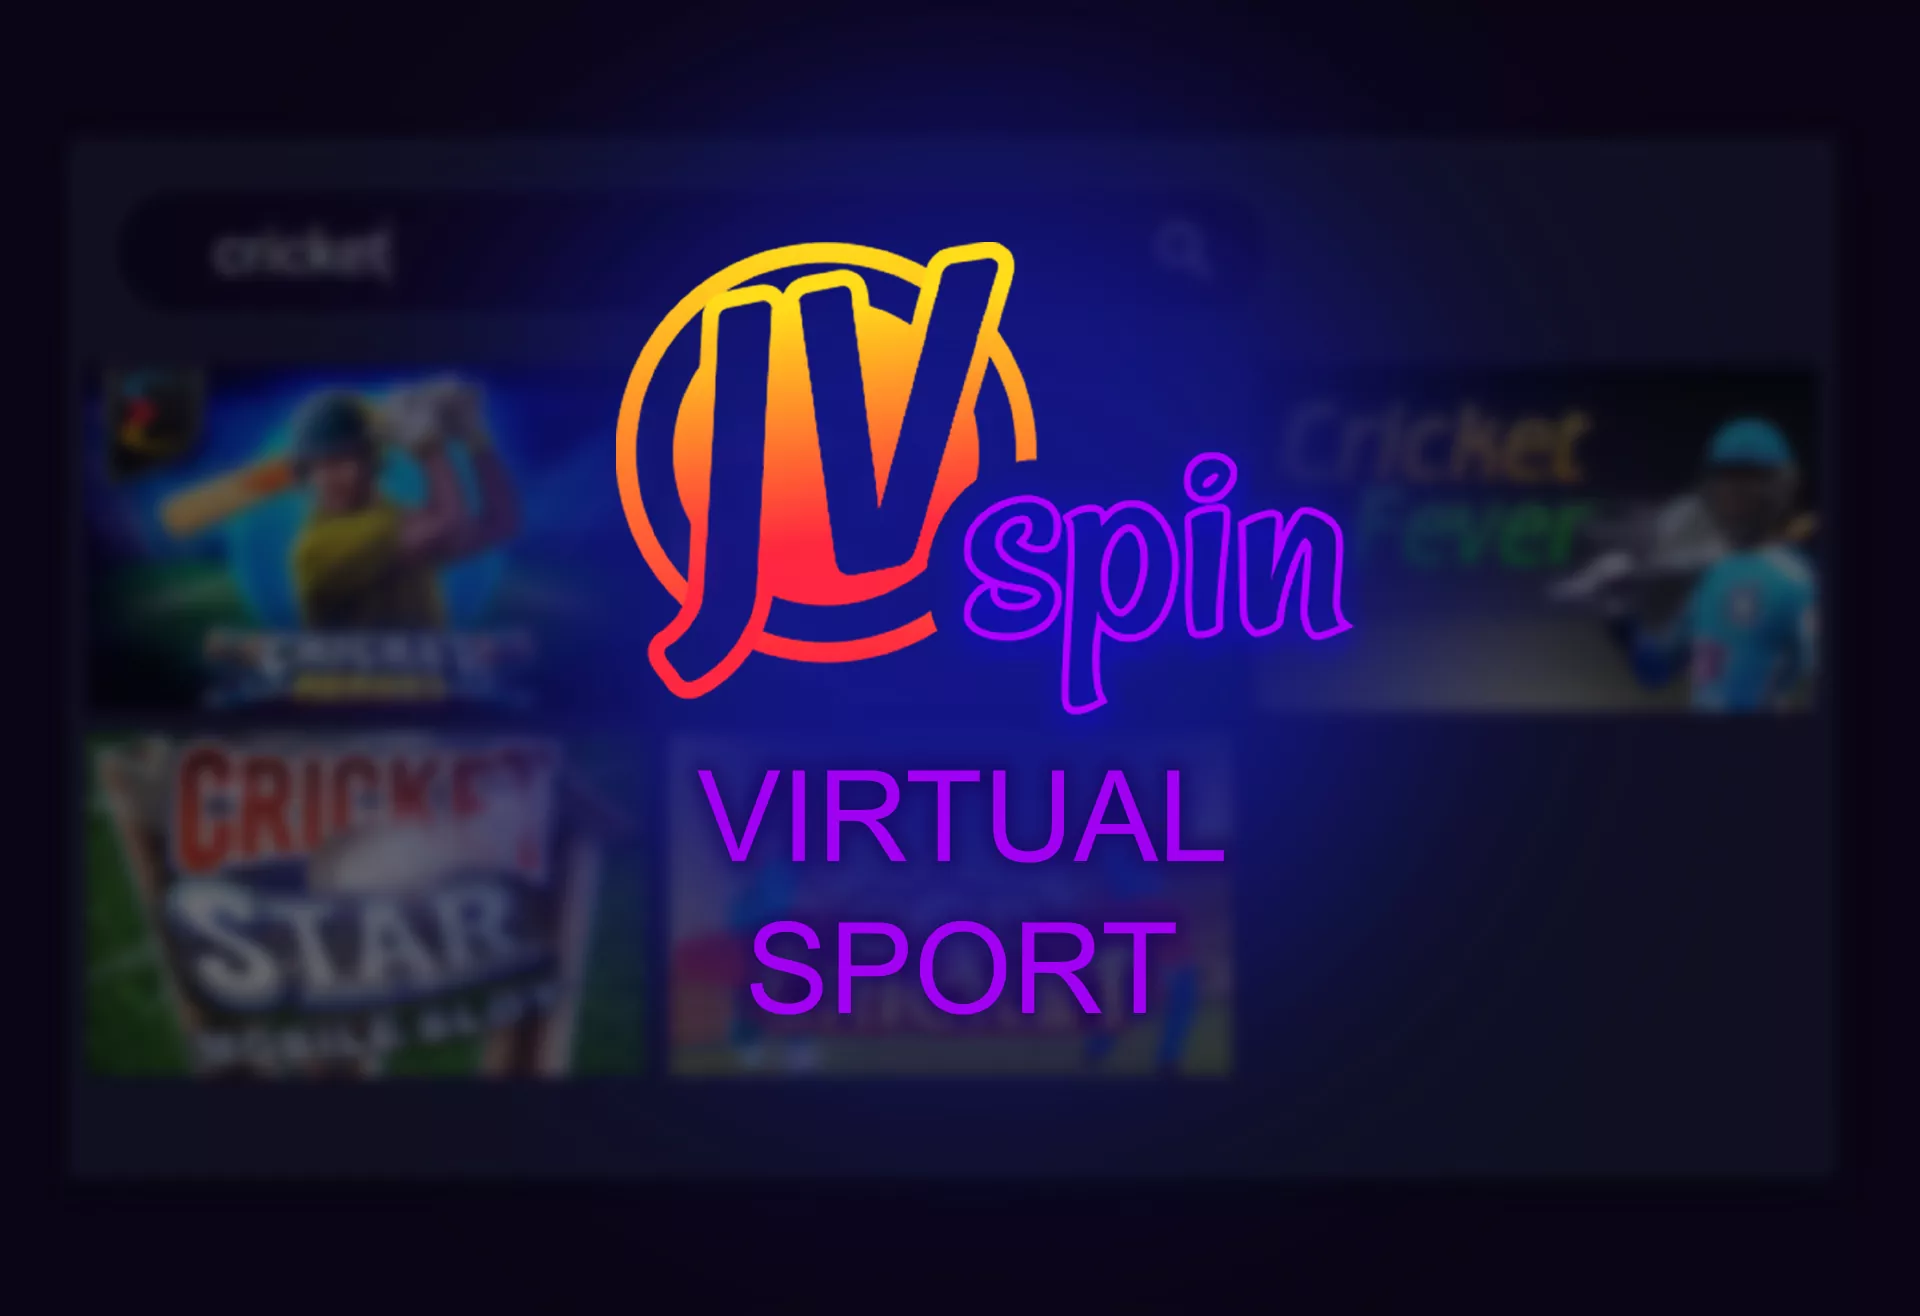 If you like sport games, try slots imitating cricket or football.